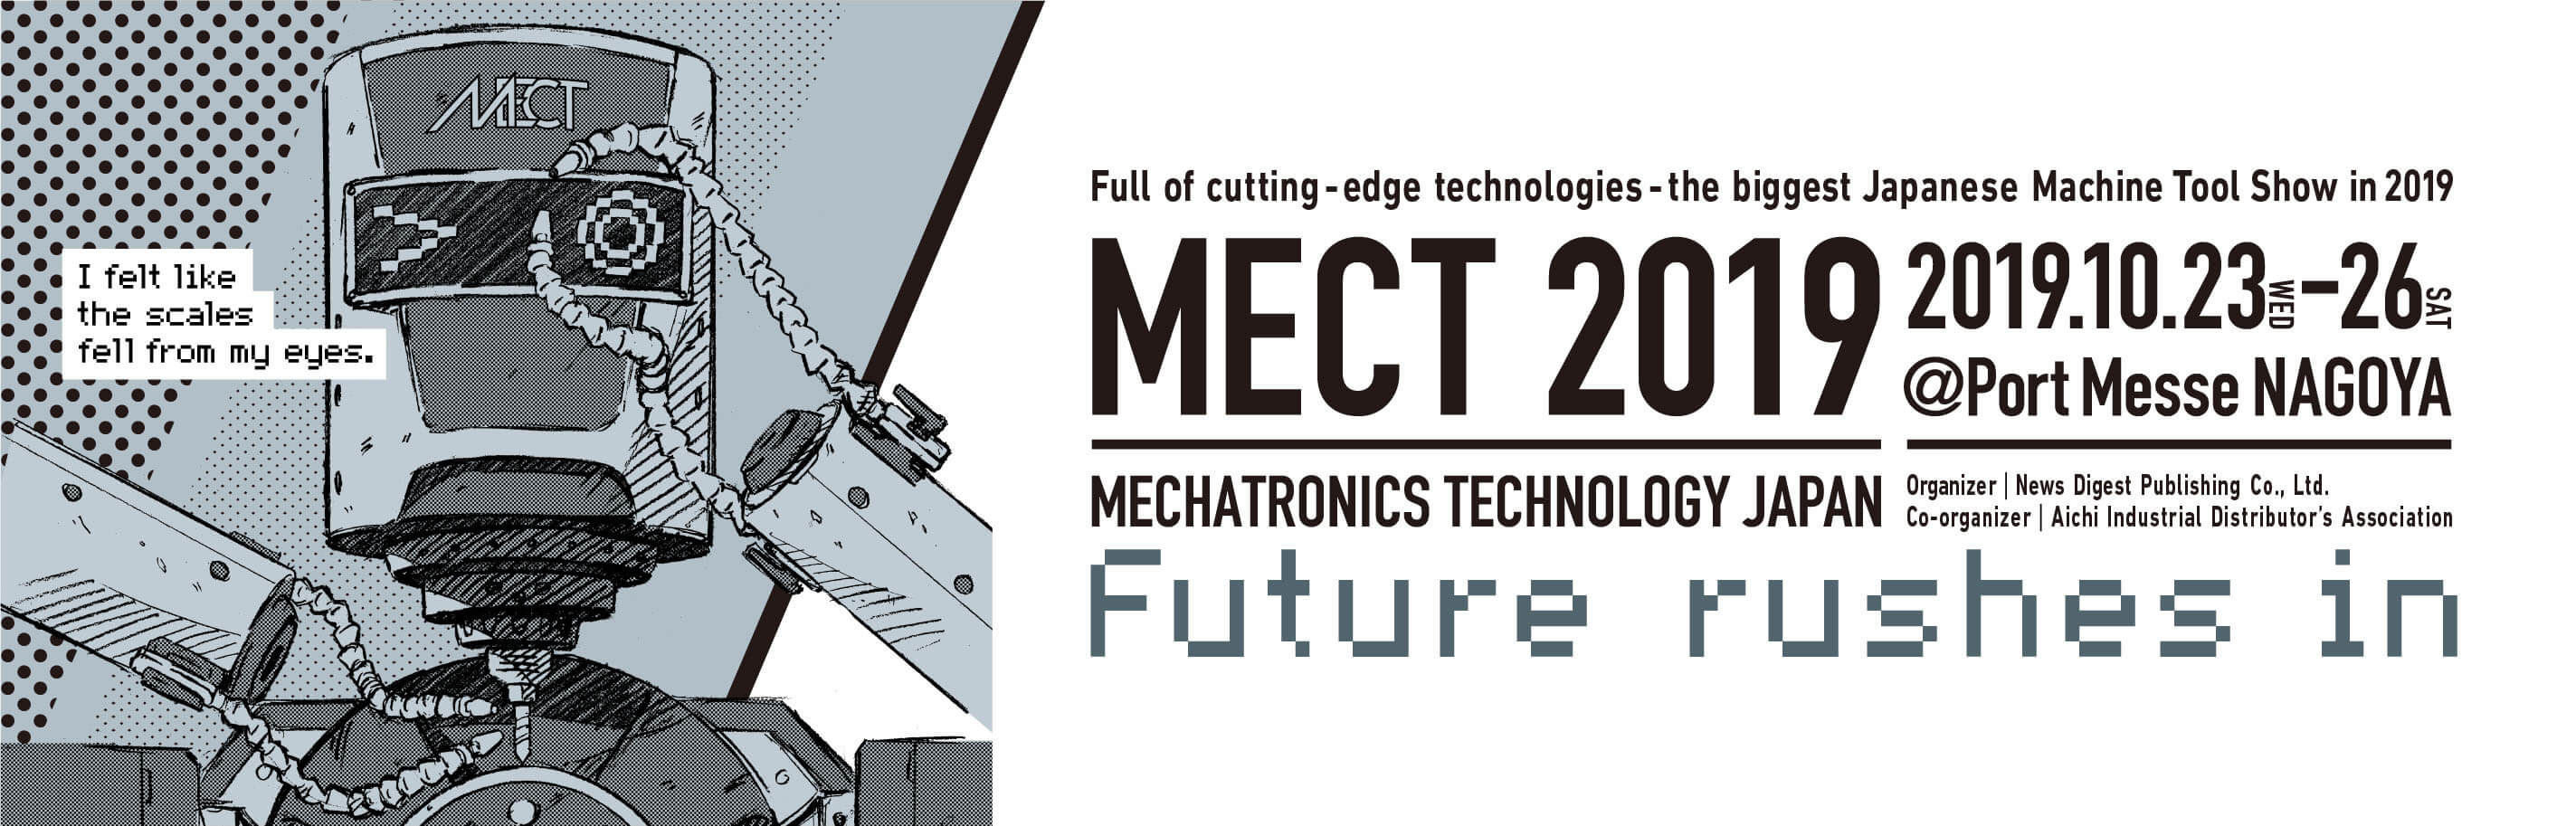 Full of cutting -edge technologies - the biggest machine tool show in JAPAN